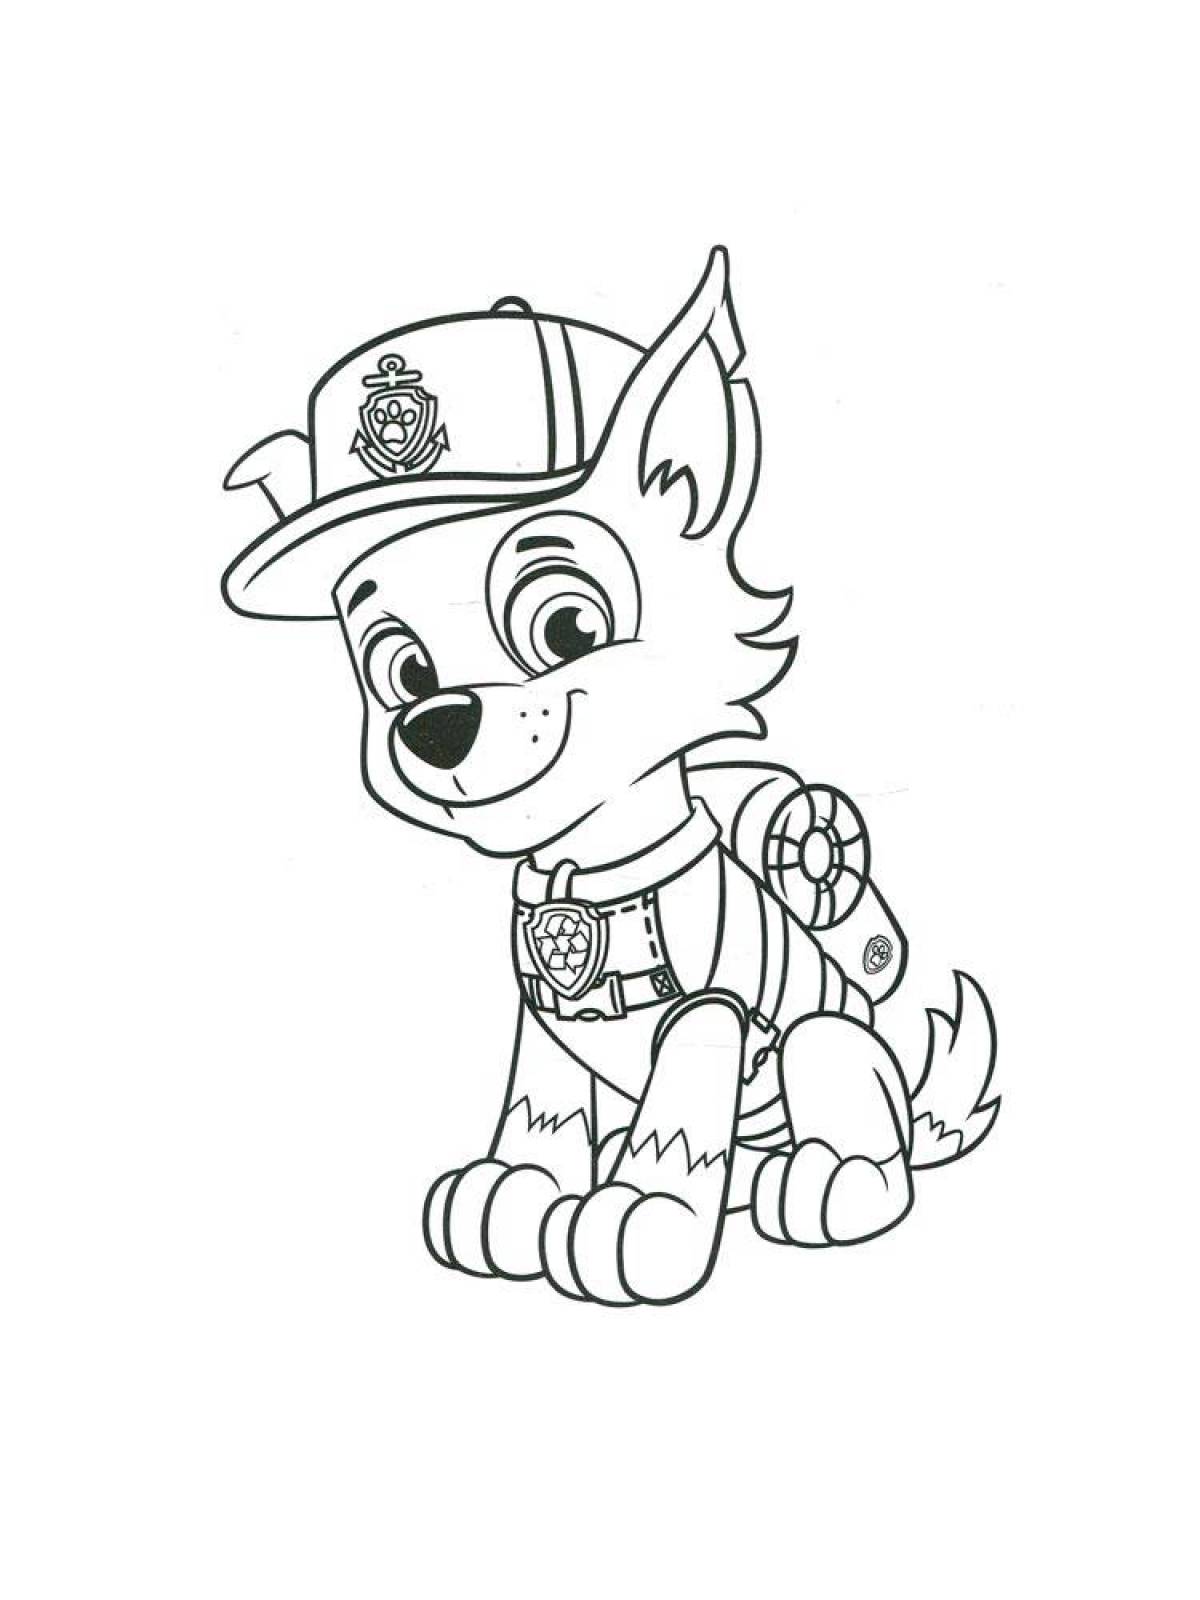 Rocky paw patrol amazing coloring book